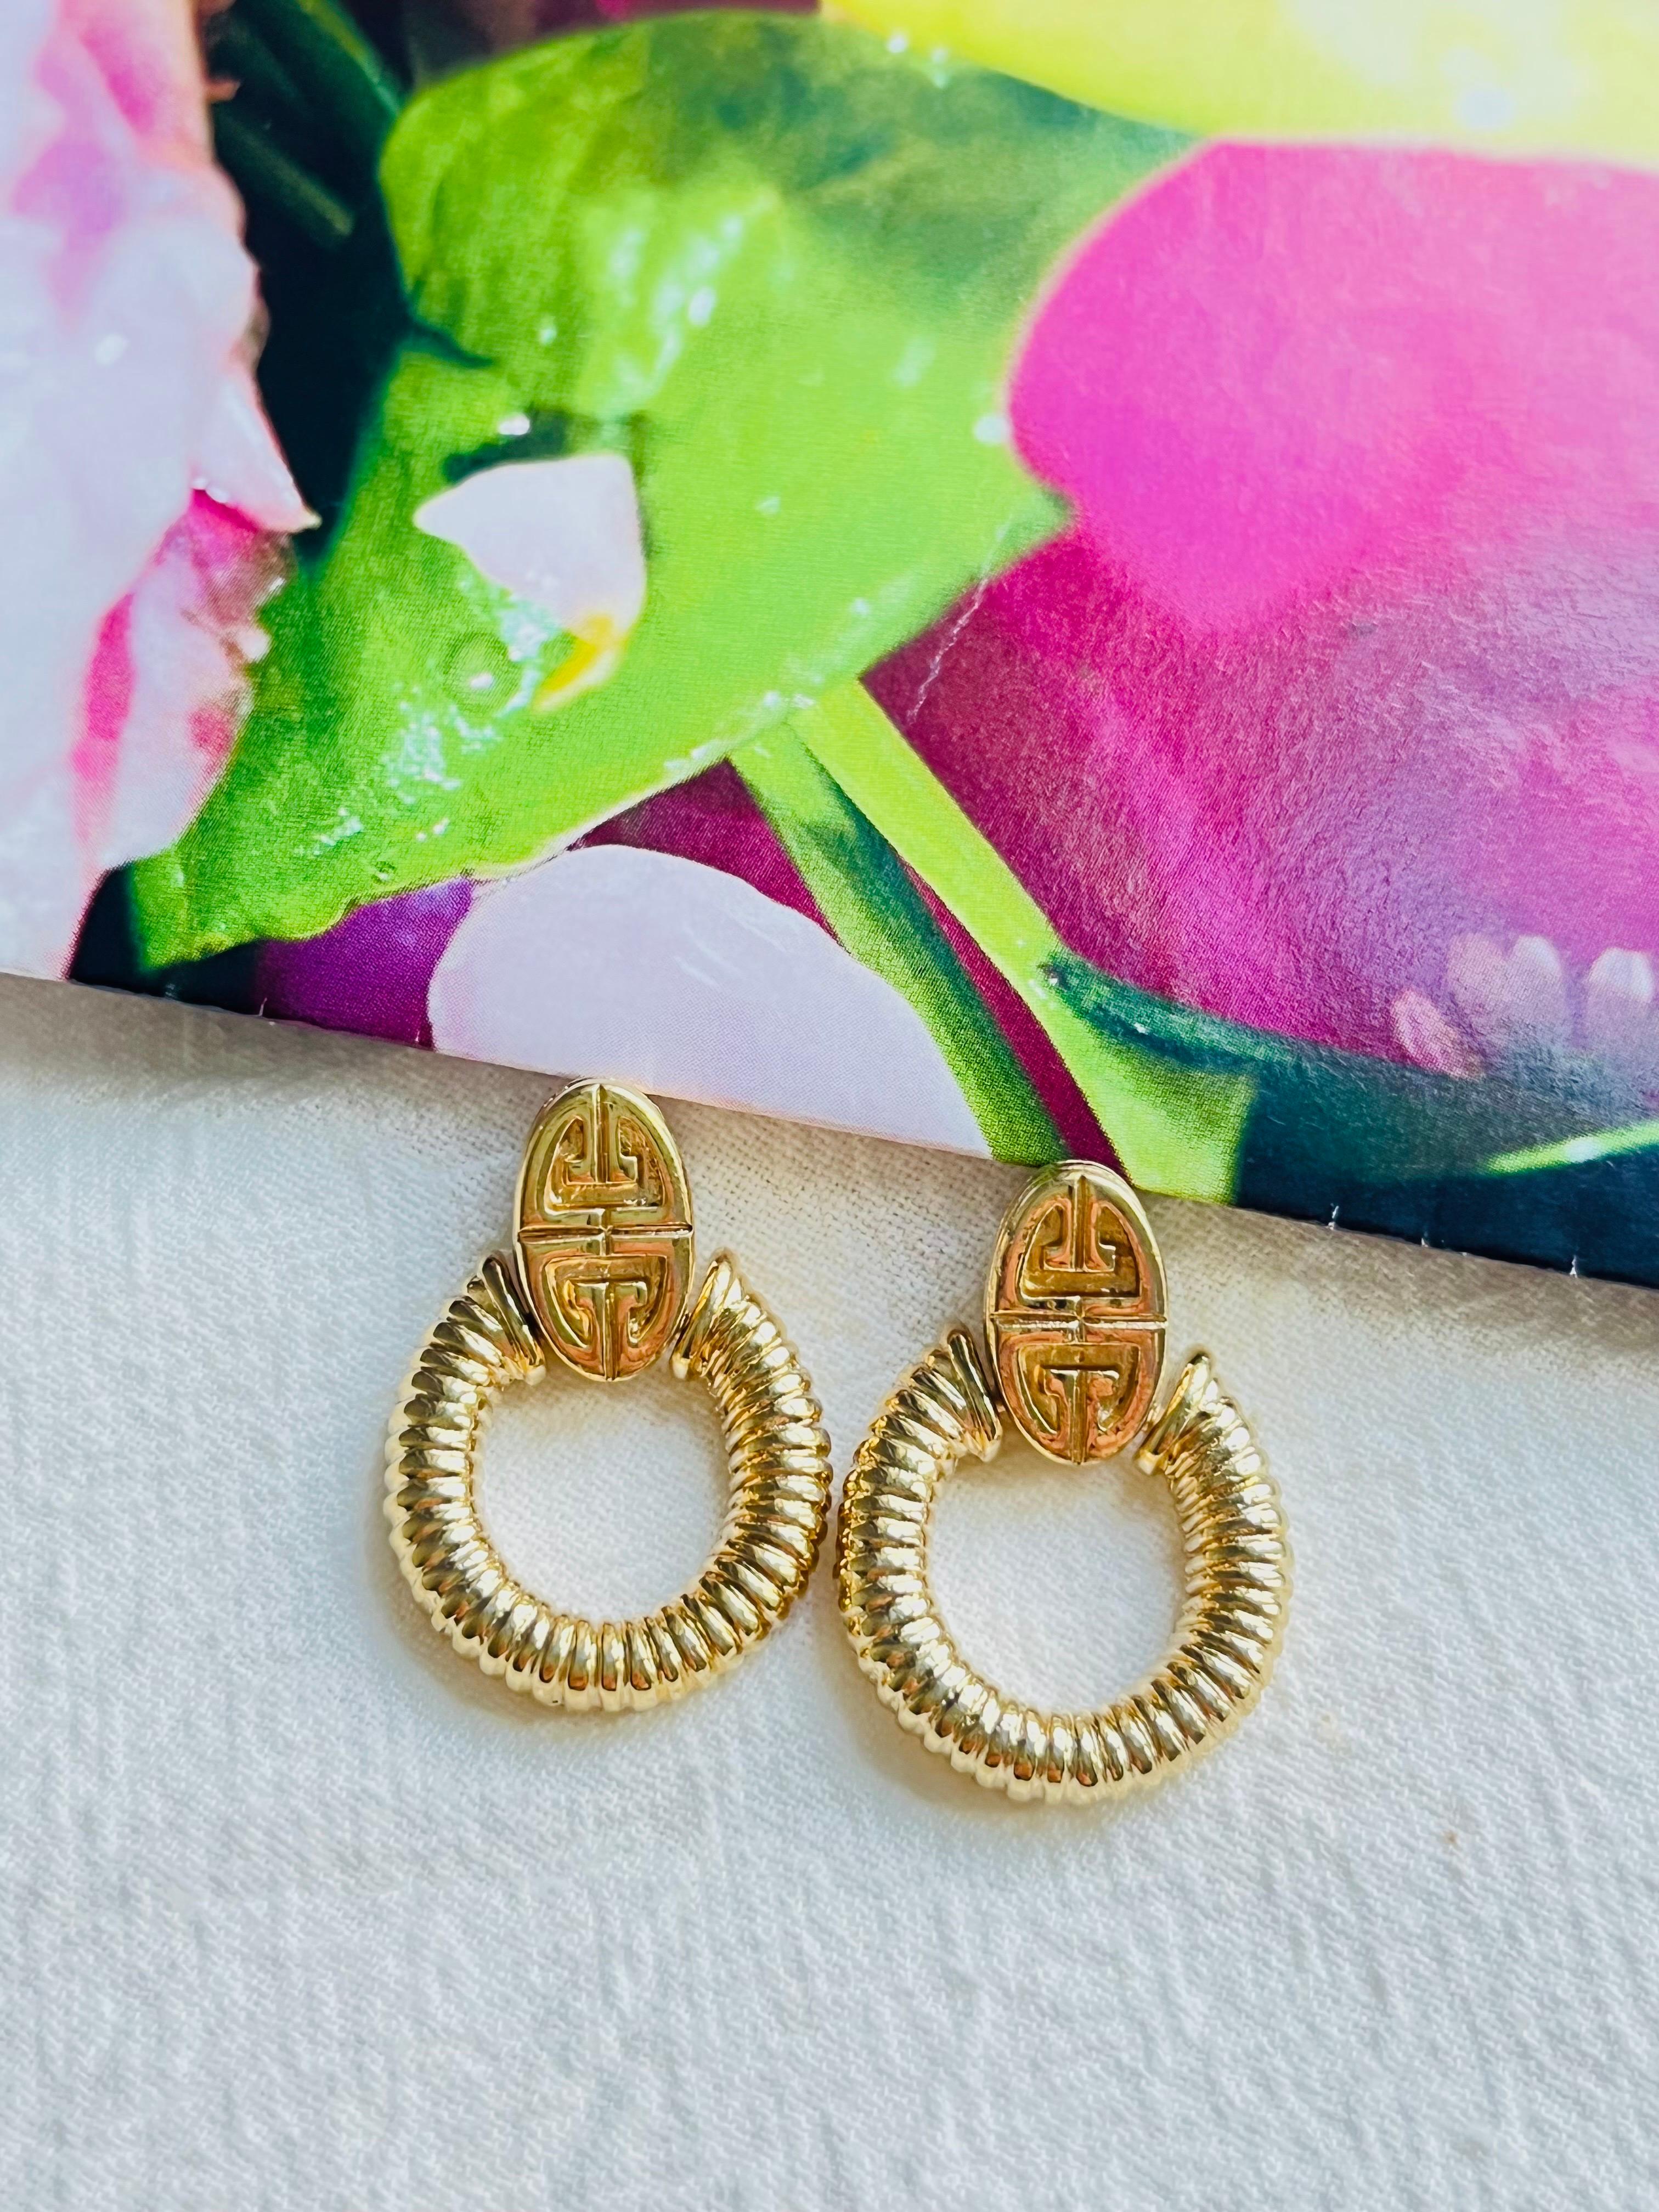 Givenchy Vintage 1980s Logo Monogram Door Knocker Oval Hoop Pierced Earrings, Gold Tone

Very good condition. Special style design. 100% Genuine.

Givenchy Signed clearly on the reverse.

Size: 3.0*2.0 cm.

Weight: 6 g/each.

_ _ _

Great for